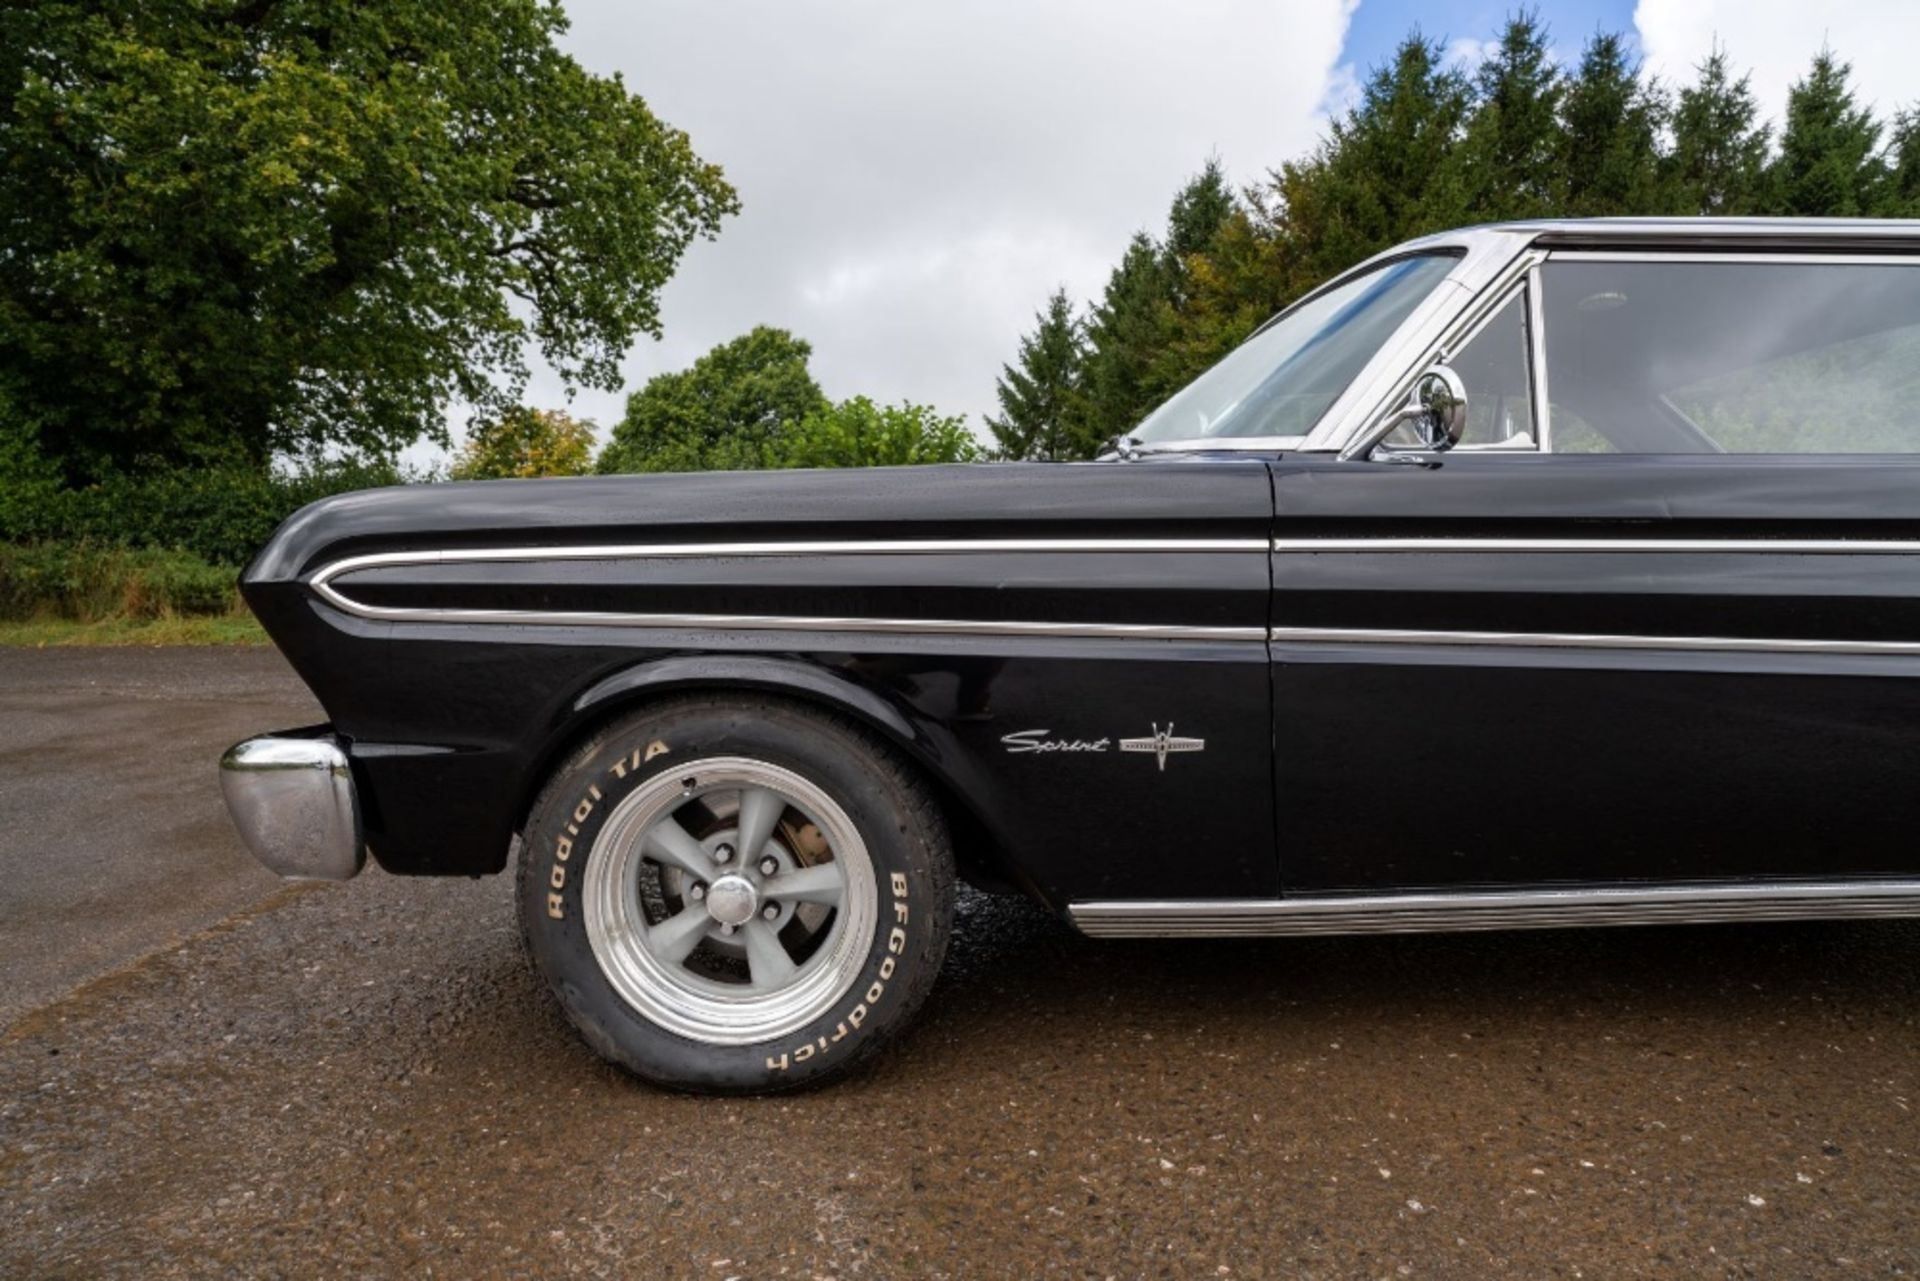 1964 FORD FALCON SPRINT Registration Number: NWT 302A Chassis Number: TBA Recorded Mileage: 41,500 - Image 4 of 16